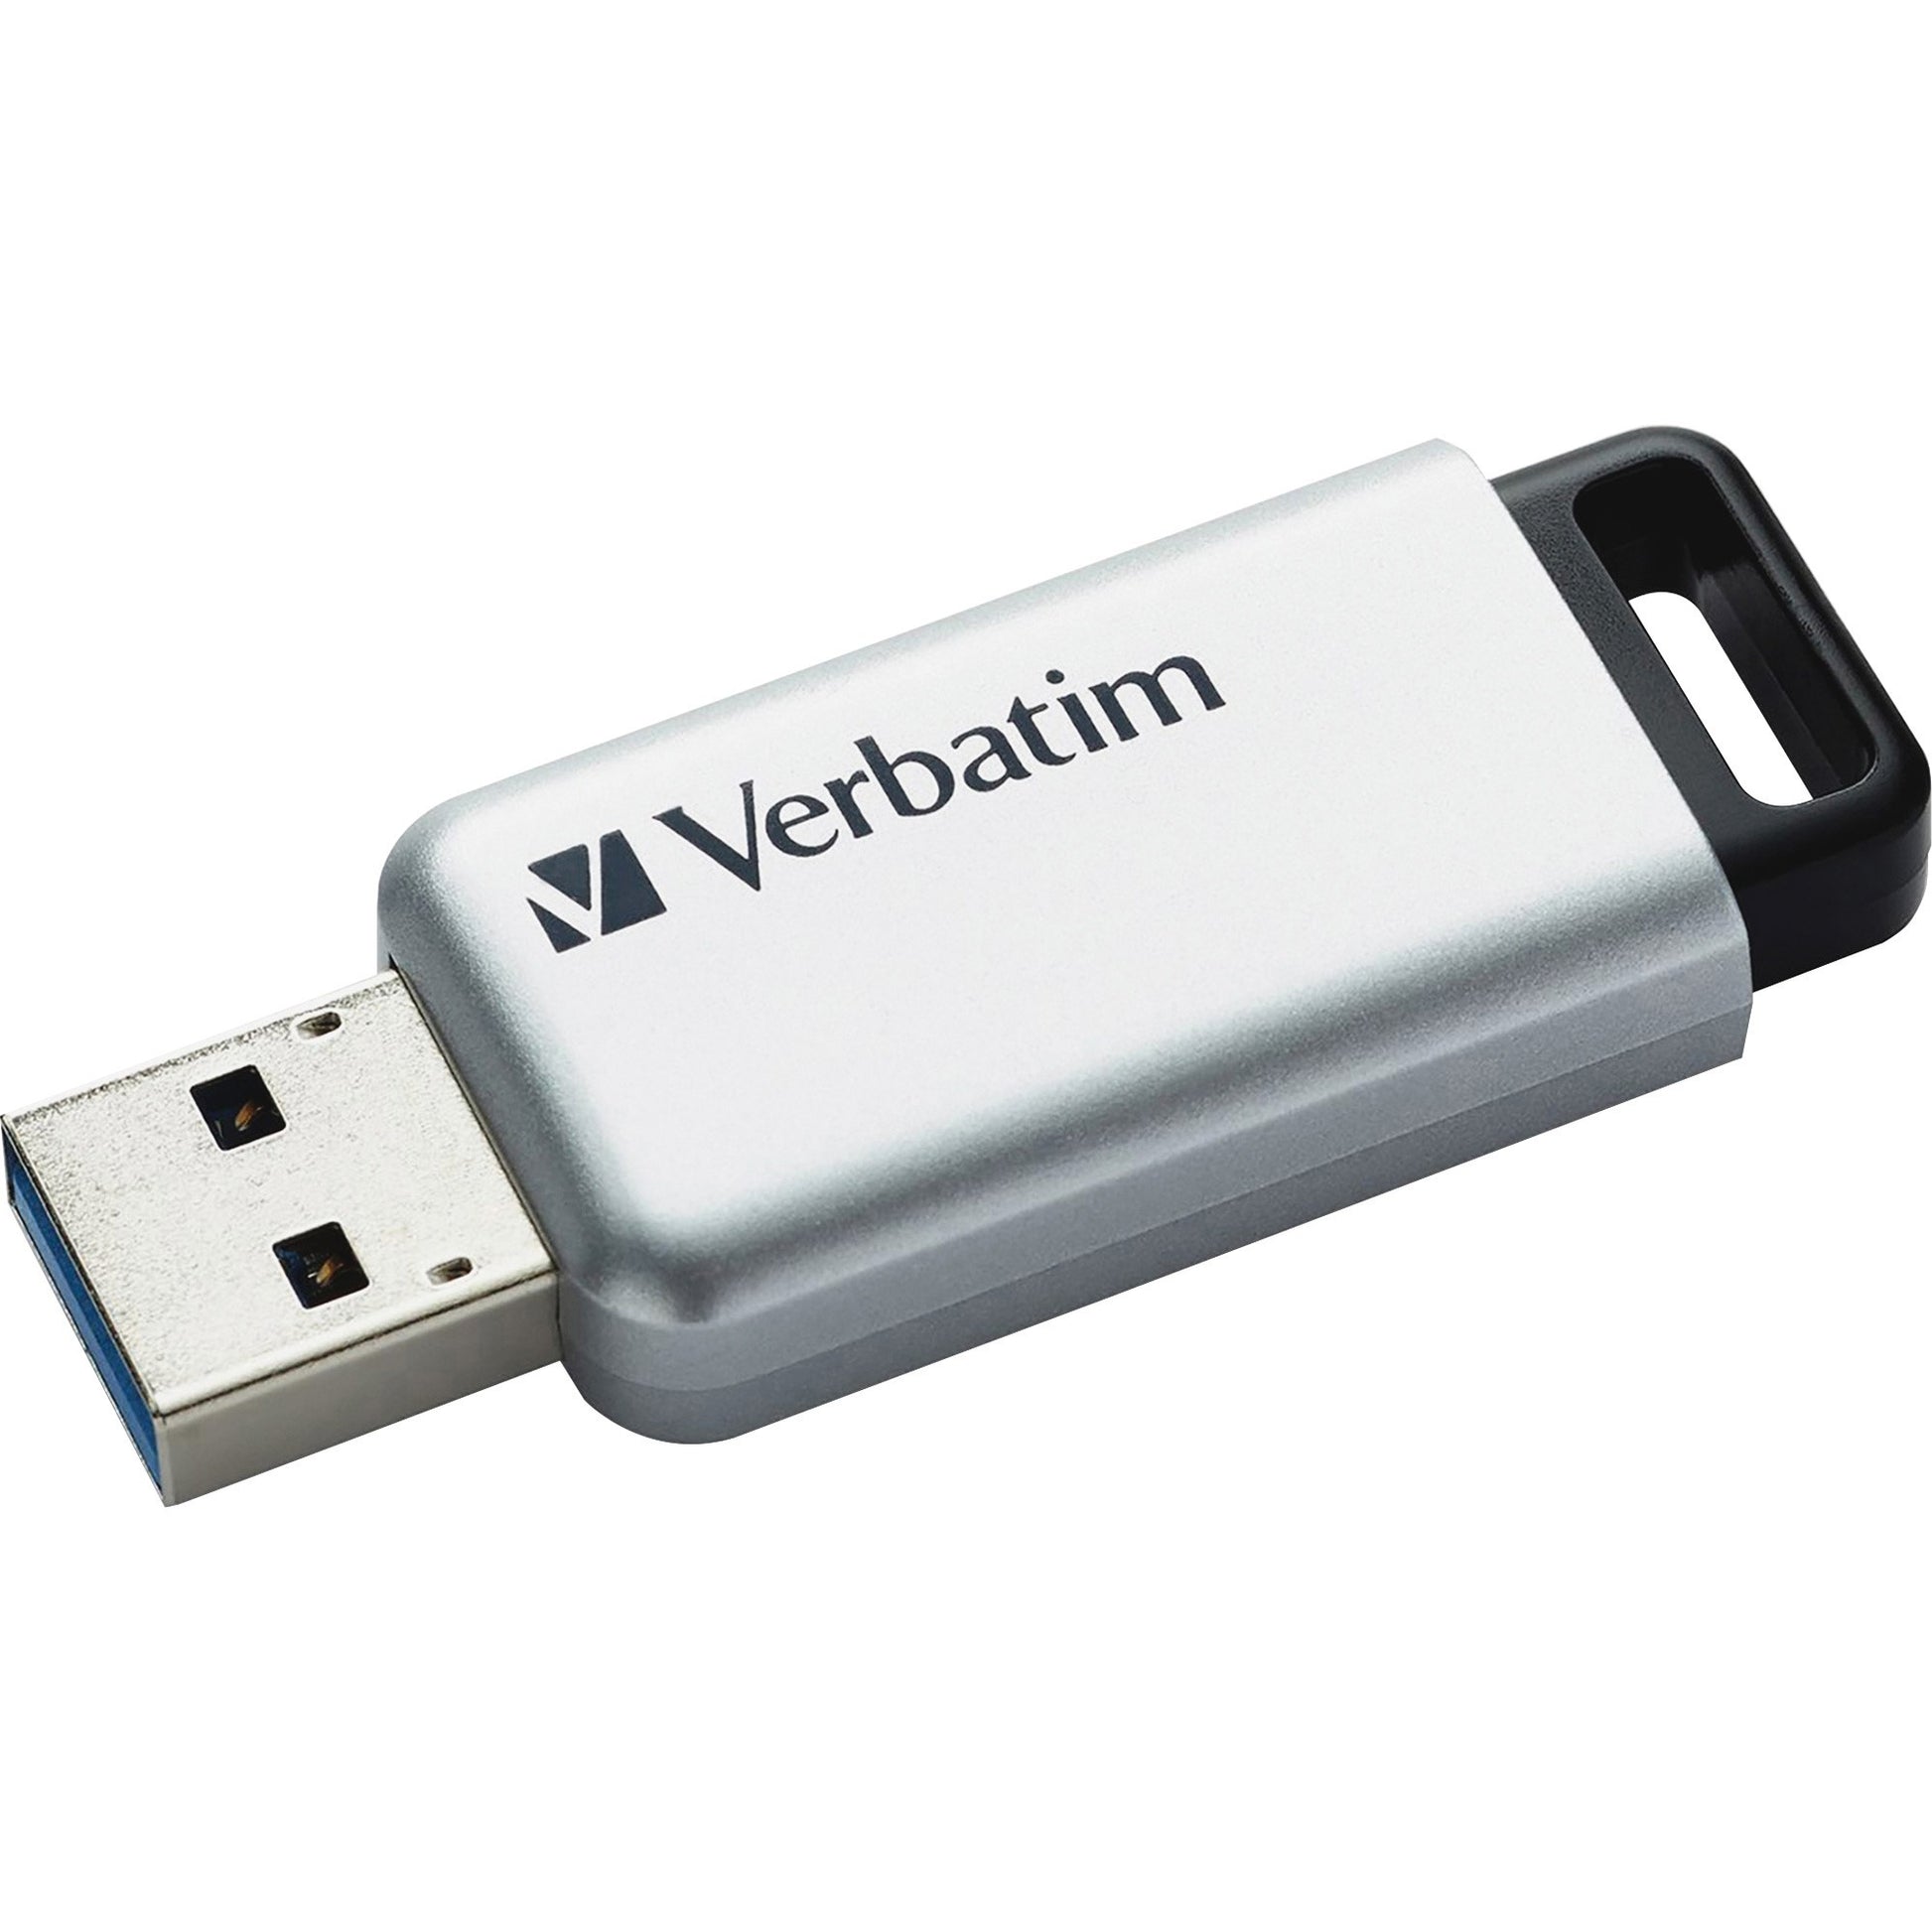 Verbatim 64GB Store'n' Go Secure Pro USB 3.0 Flash Drive with AES 256 Hardware Encryption - Silver